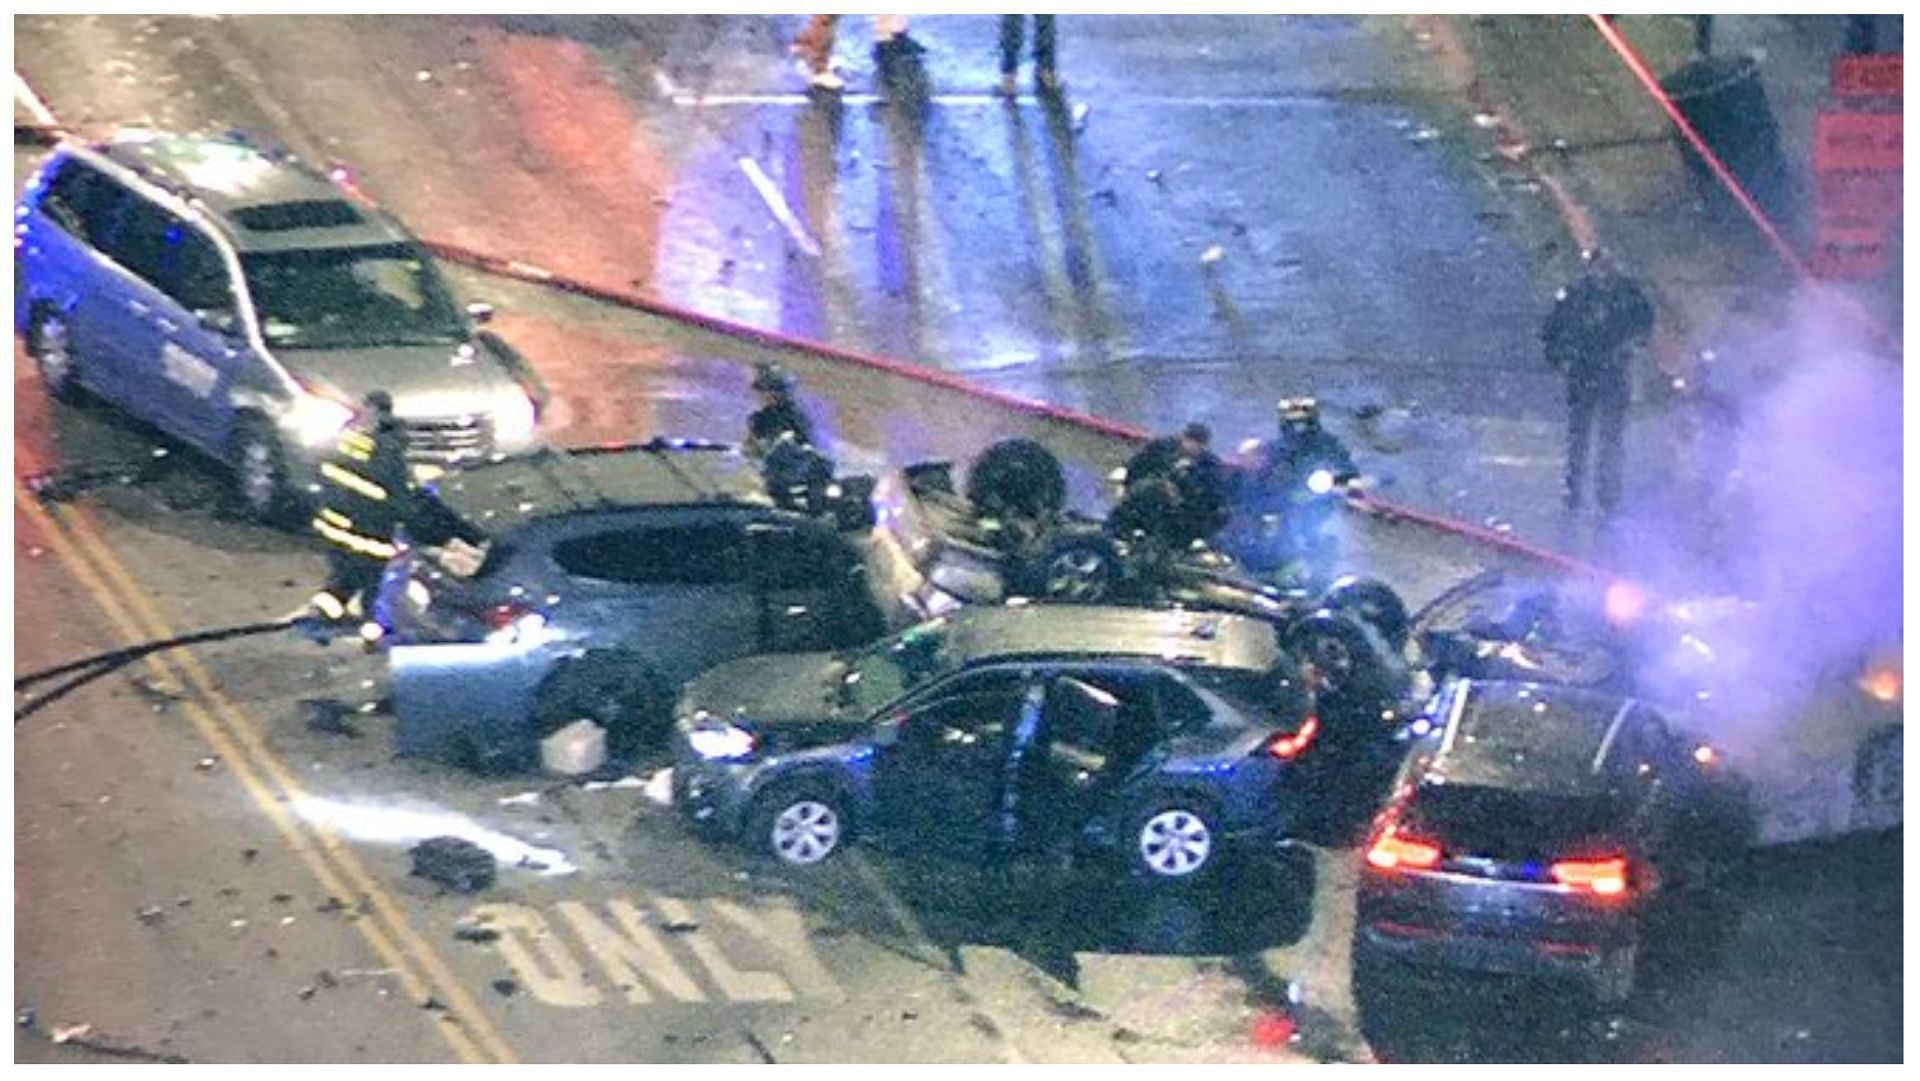 Stolen vehicle causes multi-car crash in Chicago, (image via Mike Lorber/Twitter)